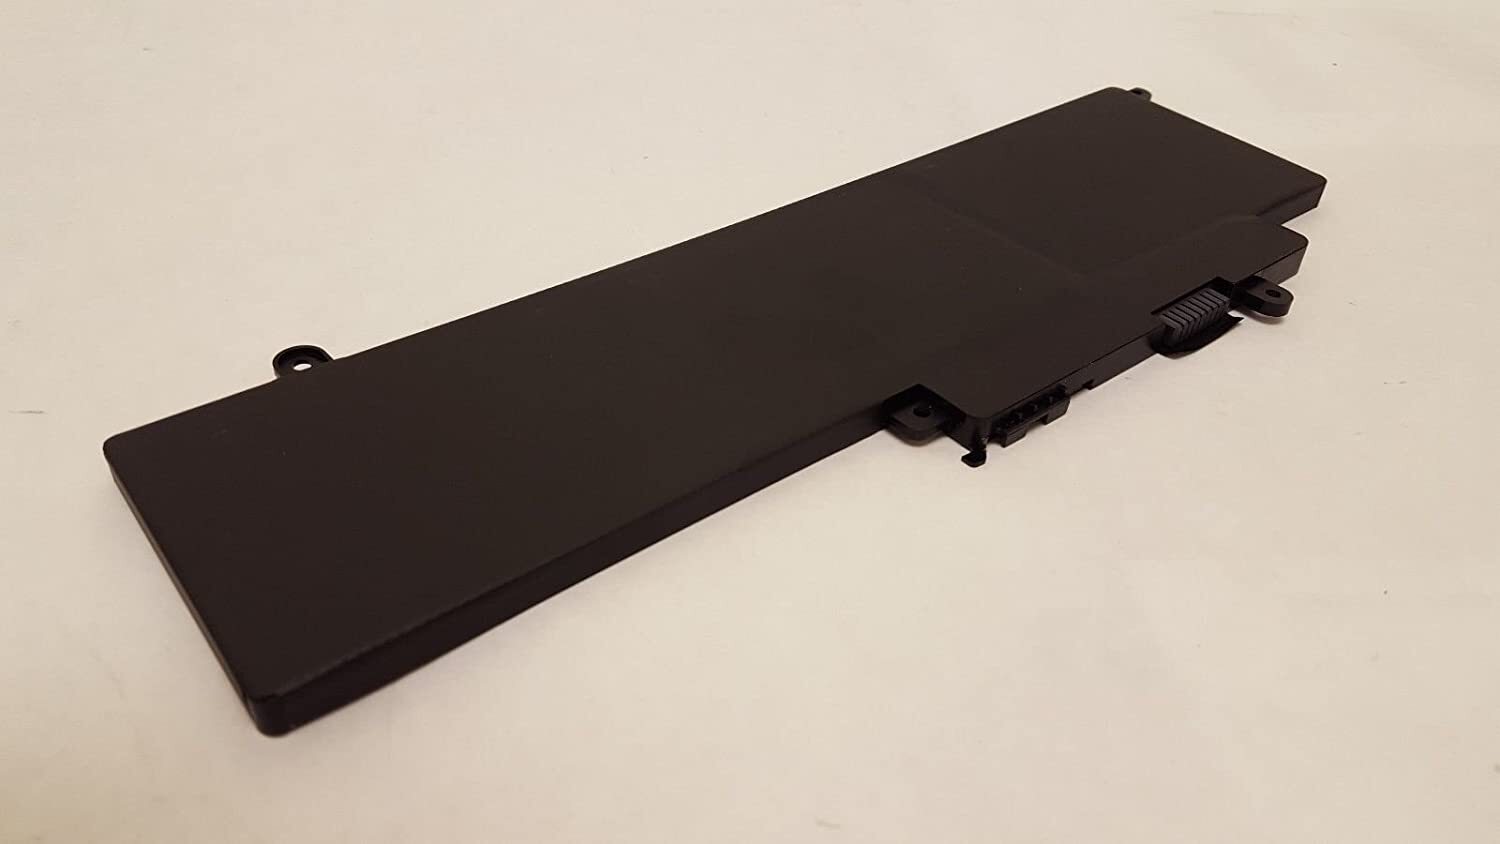 Dell Easyget Laptop Battery 0WF28 GK5KY 11.1V 43Wh for Inspiron P20T 11-3147 Series and 13 7347 Laptop 4K8YH 00WF28 04K8YH-M000000000473 www.mysocially.com